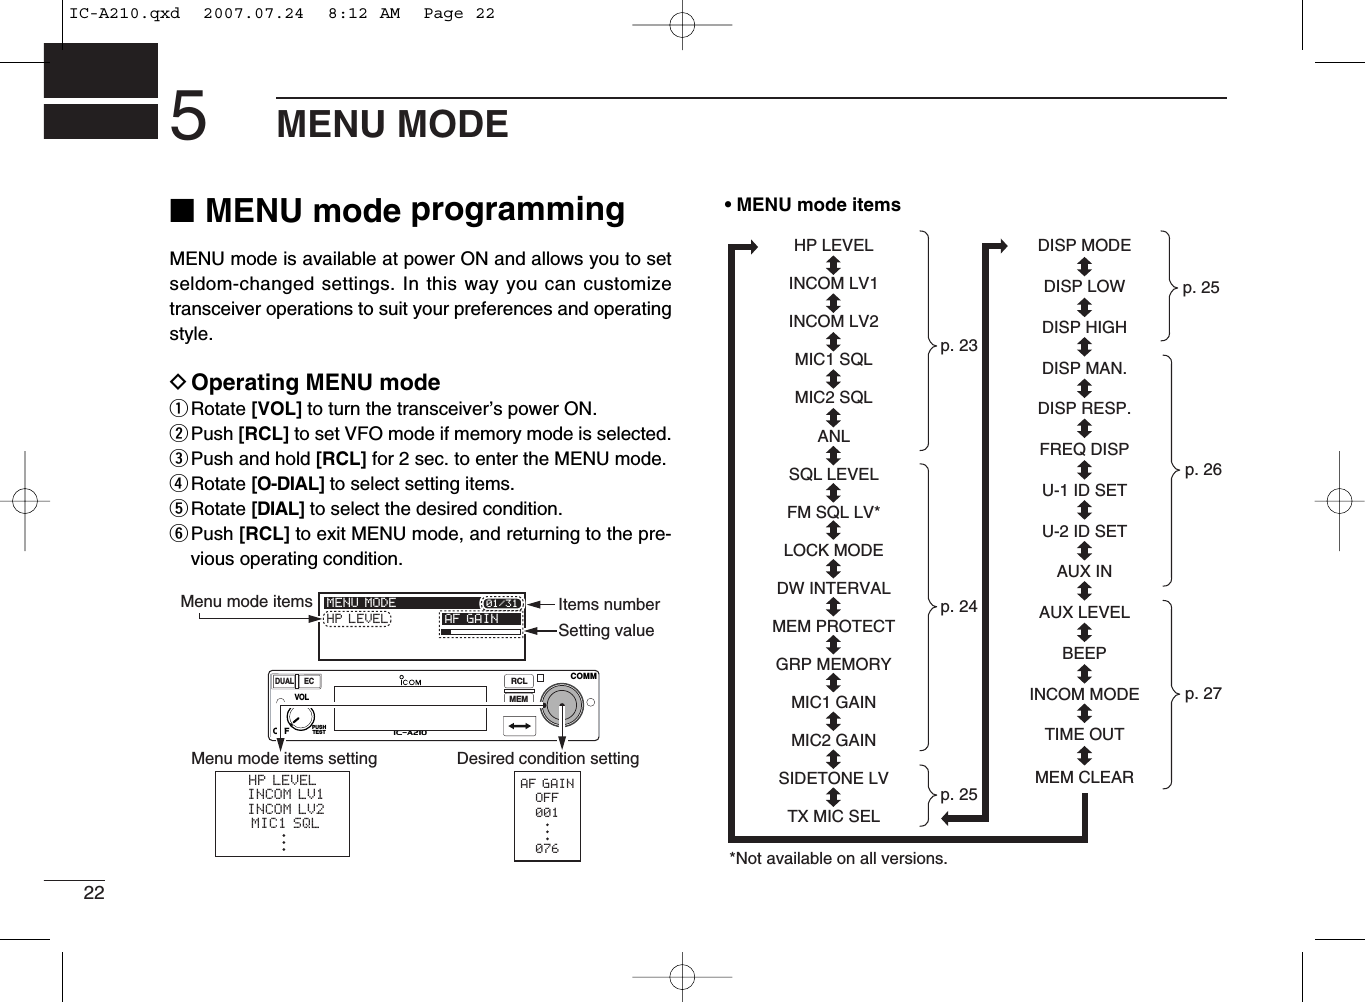 225MENU MODE■MENU mode programmingMENU mode is available at power ON and allows you to setseldom-changed settings. In this way you can customizetransceiver operations to suit your preferences and operatingstyle.DOperating MENU modeqRotate [VOL] to turn the transceiver’s power ON.wPush [RCL] to set VFO mode if memory mode is selected.ePush and hold [RCL] for 2 sec. to enter the MENU mode.rRotate [O-DIAL] to select setting items.tRotate [DIAL] to select the desired condition.yPush [RCL] to exit MENU mode, and returning to the pre-vious operating condition.• MENU mode itemsMENU MODEHP LEVEL AF GAIN01/31RCLMEMOFFVOLPUSHTESTCOMMDUALECiA210AF GAINOFF001076Desired condition settingHP LEVELINCOM LV1INCOM LV2MIC1 SQLMenu mode items settingMenu mode items Items numberSetting valuep. 23HP LEVELGRP MEMORYINCOM LV2INCOM LV1MIC1 SQLMIC2 SQLANLSQL LEVELFM SQL LV**Not available on all versions.LOCK MODEDW INTERVALMEM PROTECTMIC2 GAINMIC1 GAINSIDETONE LVTX MIC SELDISP HIGHDISP MAN.AUX LEVELDISP MODEDISP LOWDISP RESP.FREQ DISPU-1 ID SETU-2 ID SETAUX INBEEPINCOM MODETIME OUTMEM CLEARp. 26p. 27p. 25p. 24p. 25IC-A210.qxd  2007.07.24  8:12 AM  Page 22